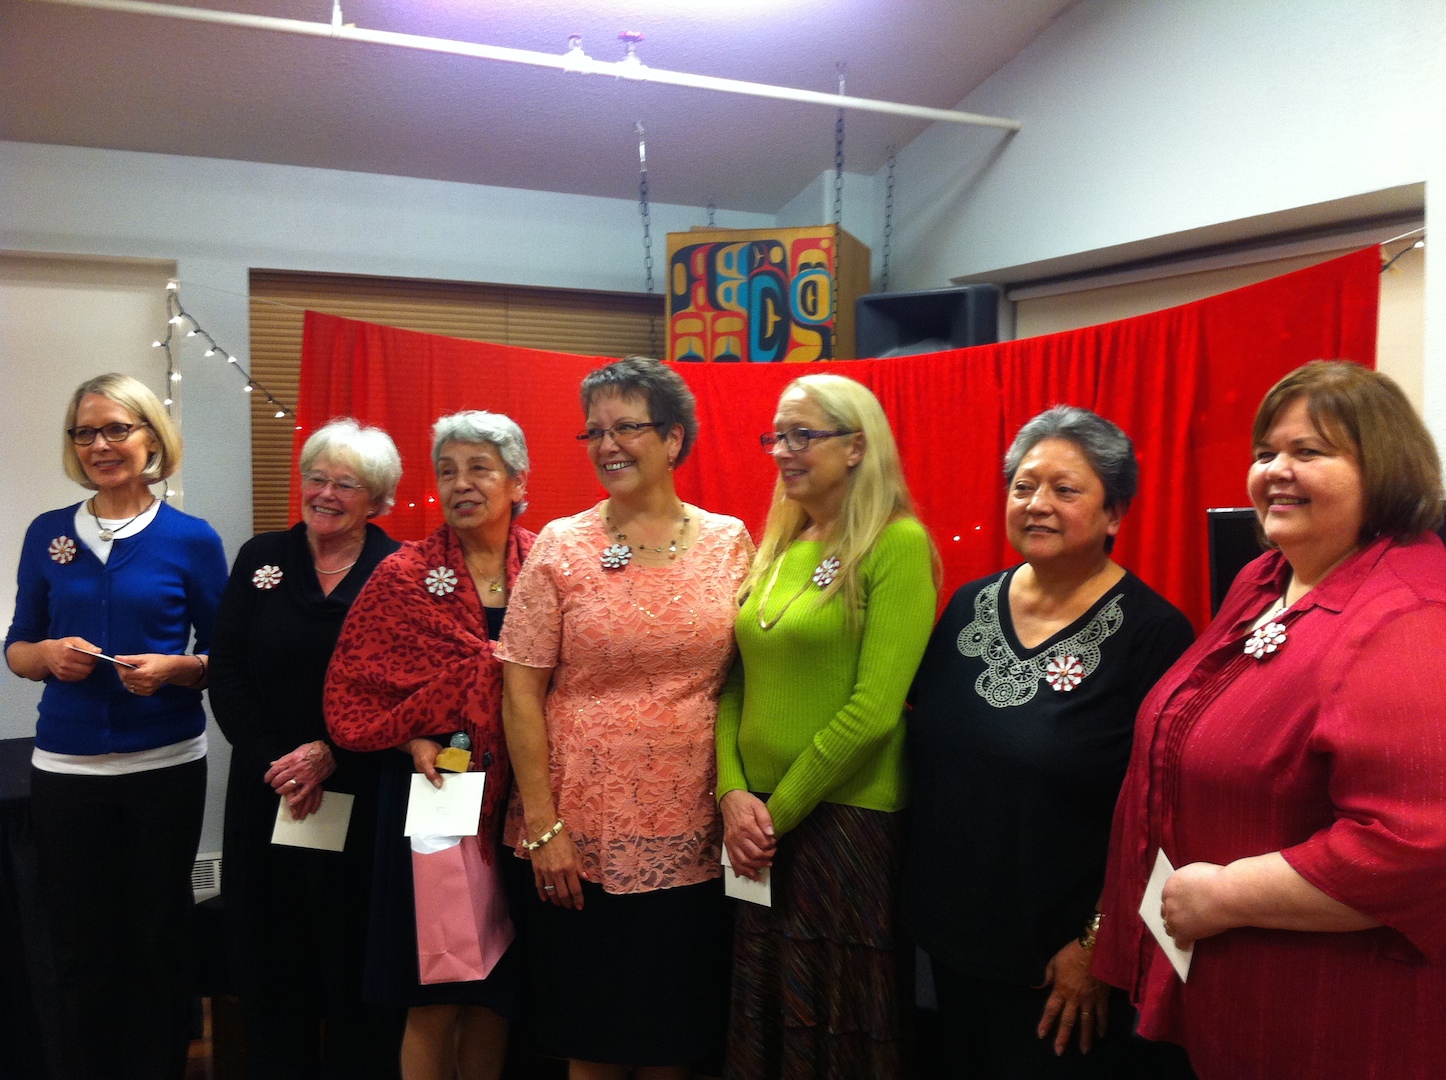 The 5th Annual Women Who Rock award recipients from left to right; Pamela Penrose from Hydaburg, Carolyn Duncan from Coffman Cove, June Walcott from Klawock, Myrn McCord from Naukati, Karen Head from Craig, Doreen Witwer from Hydaburg, and Paula Peterson from Kasaan.